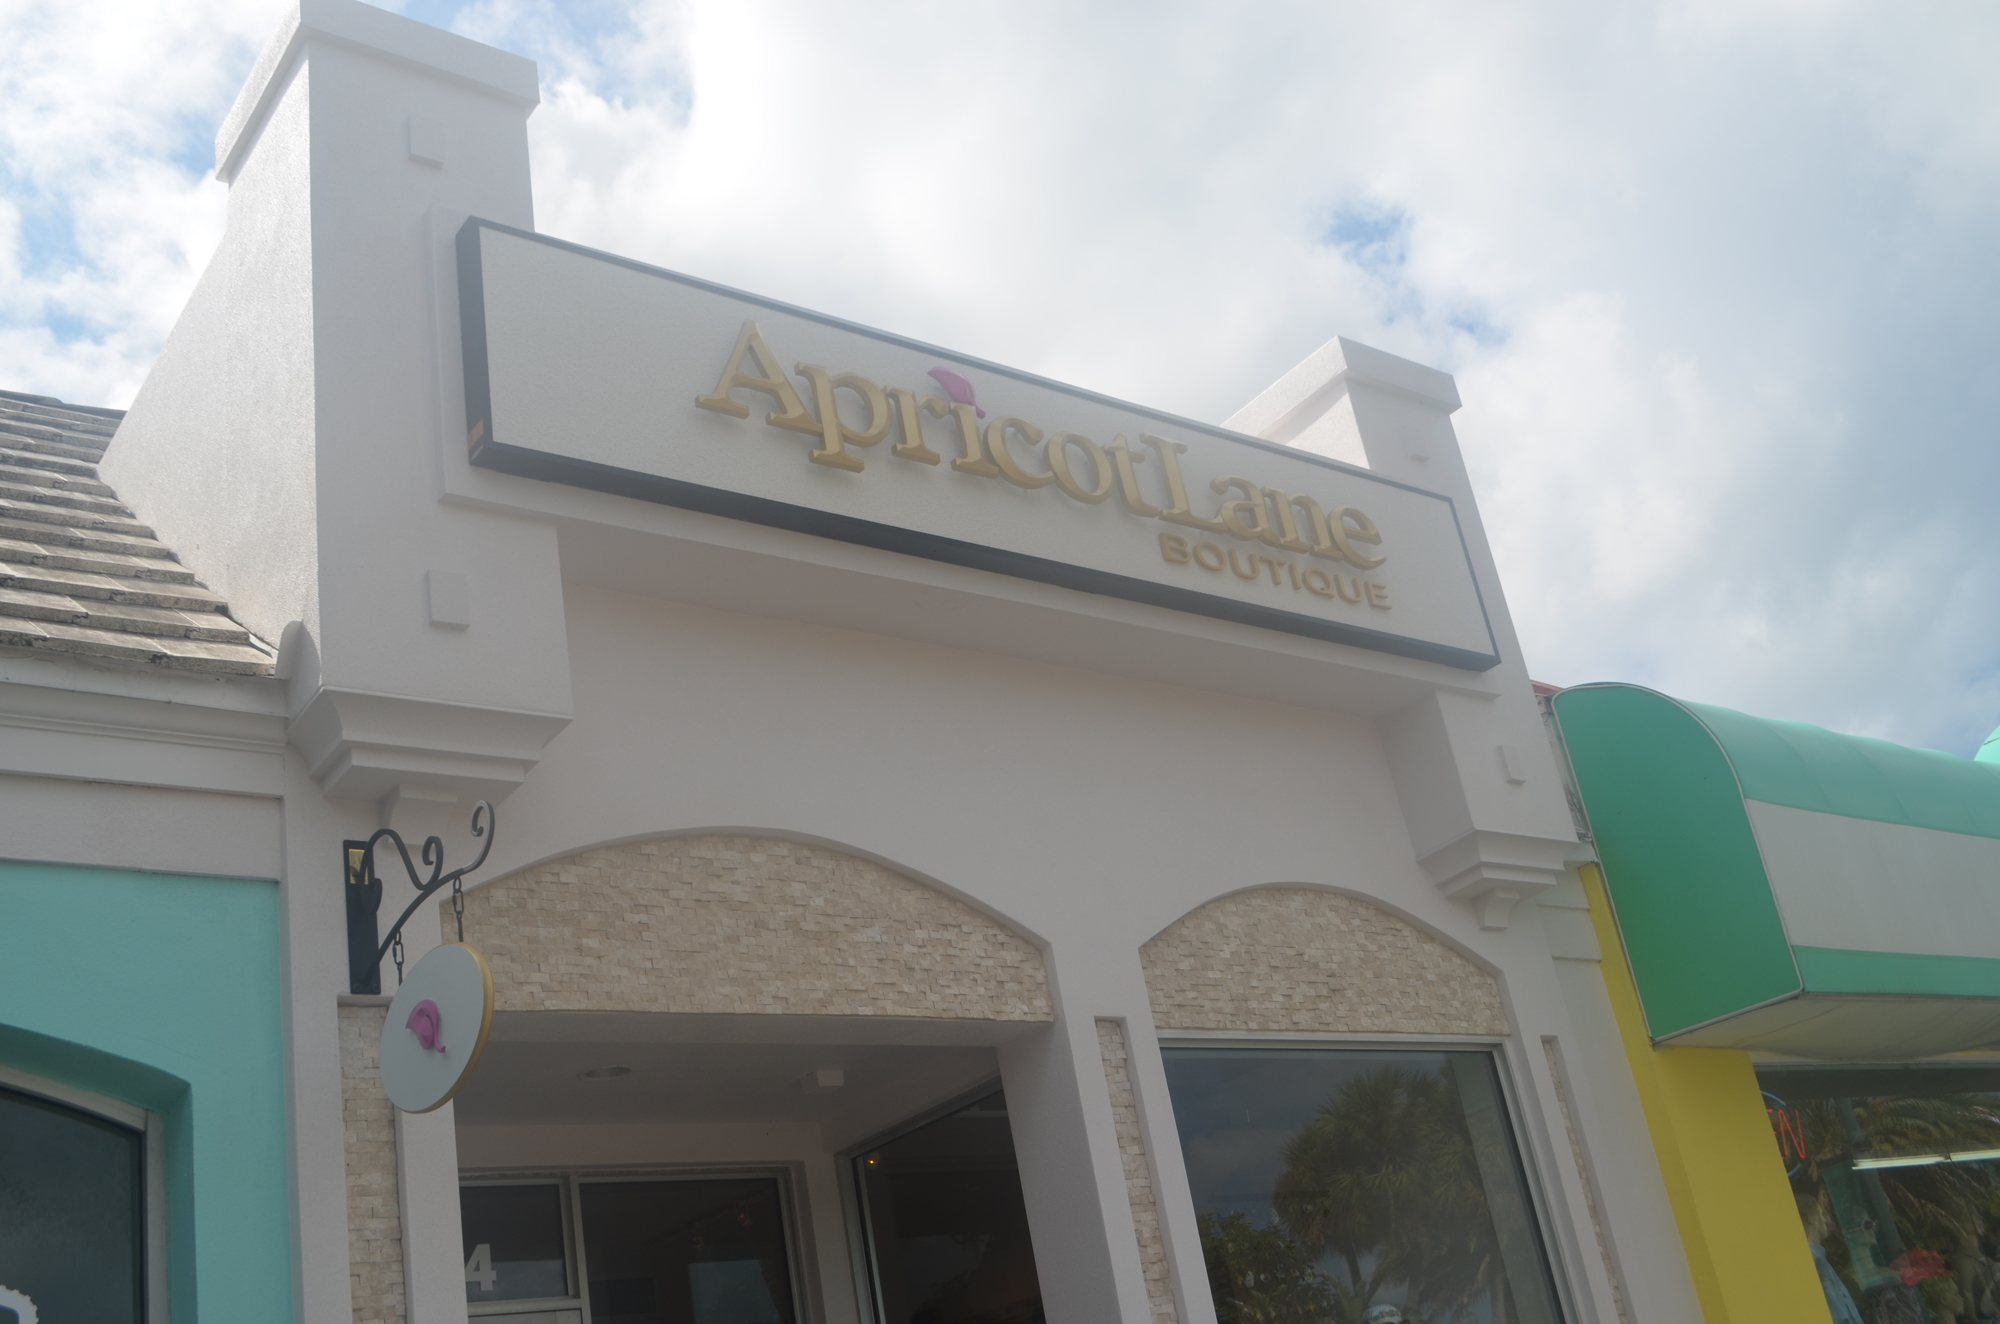 Apricot Lane opened on June 3. The store offers a variety of women's clothing for all ages.